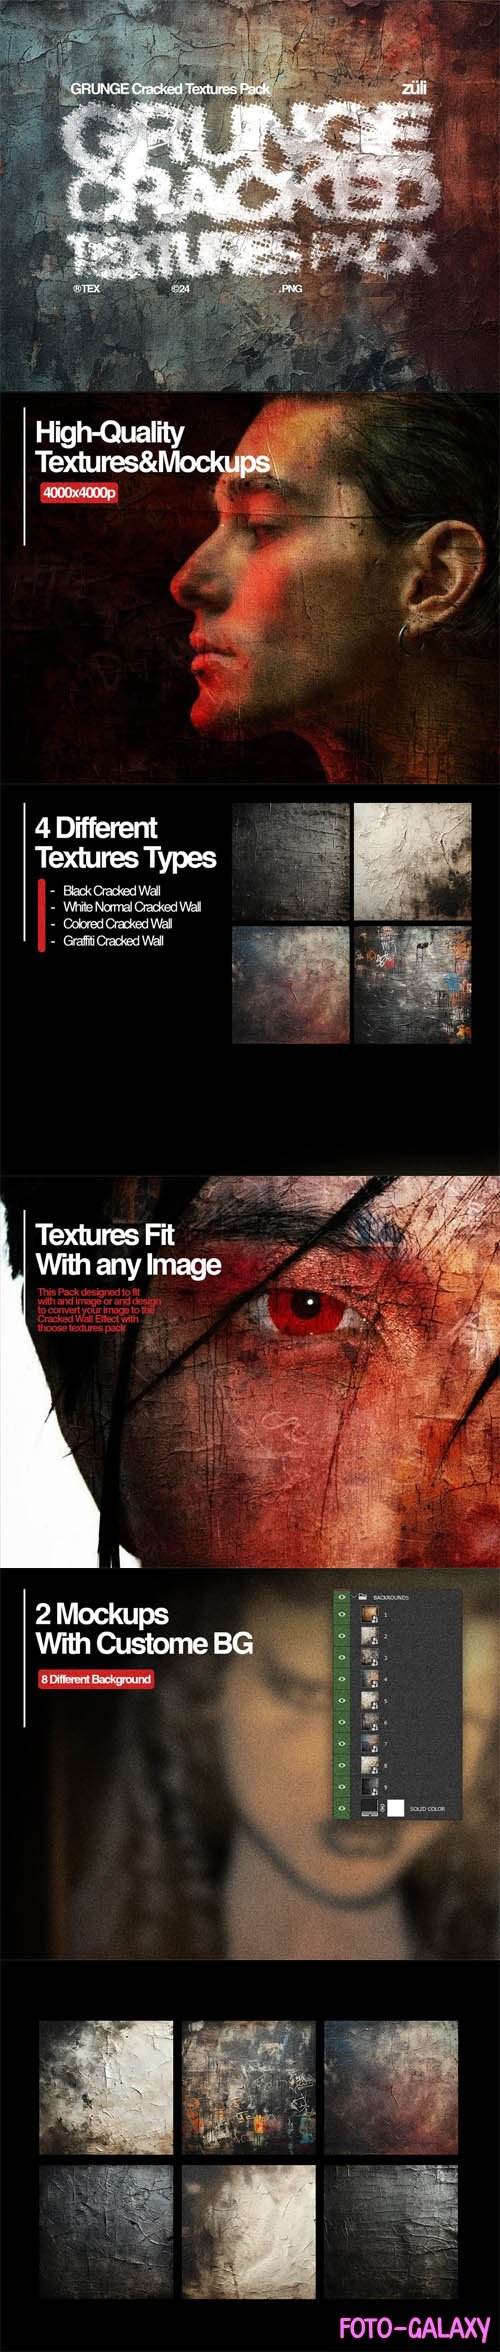 GRUNGE Cracked Textures Pack for Photoshop